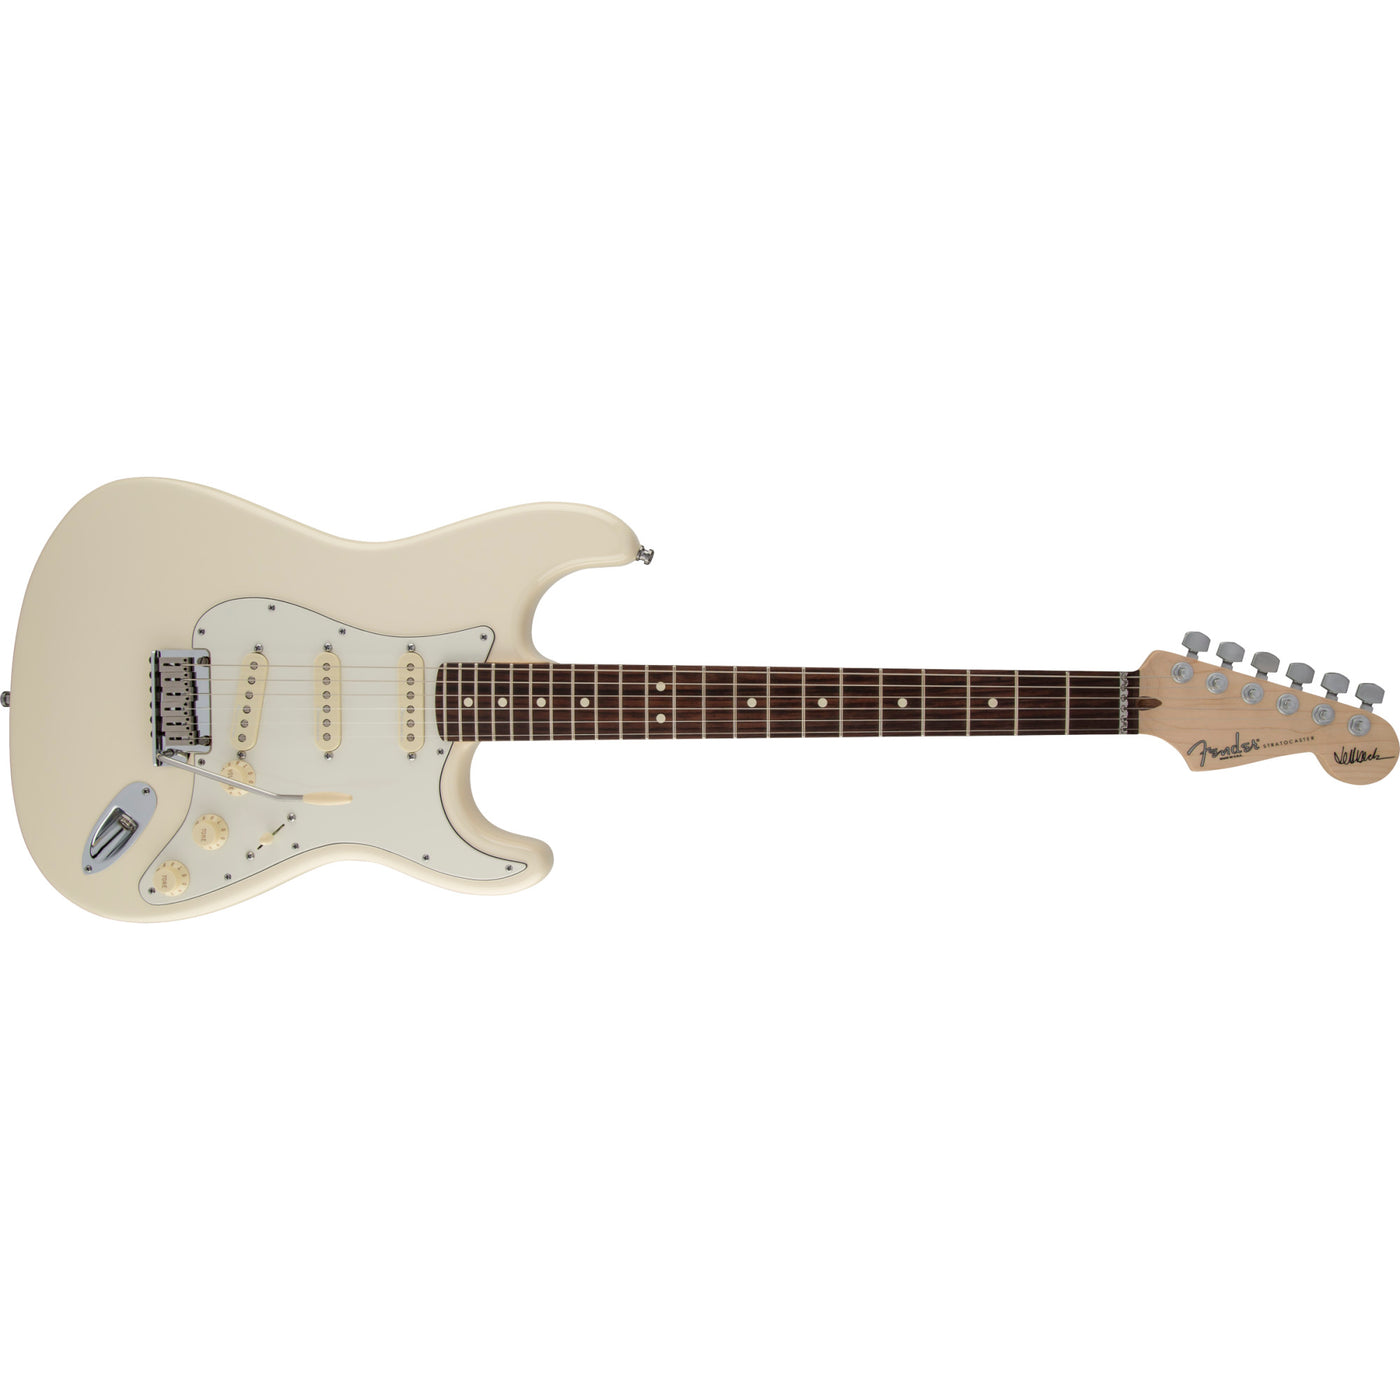 Fender Jeff Beck Stratocaster Electric Guitar, Olympic White (0119600805)